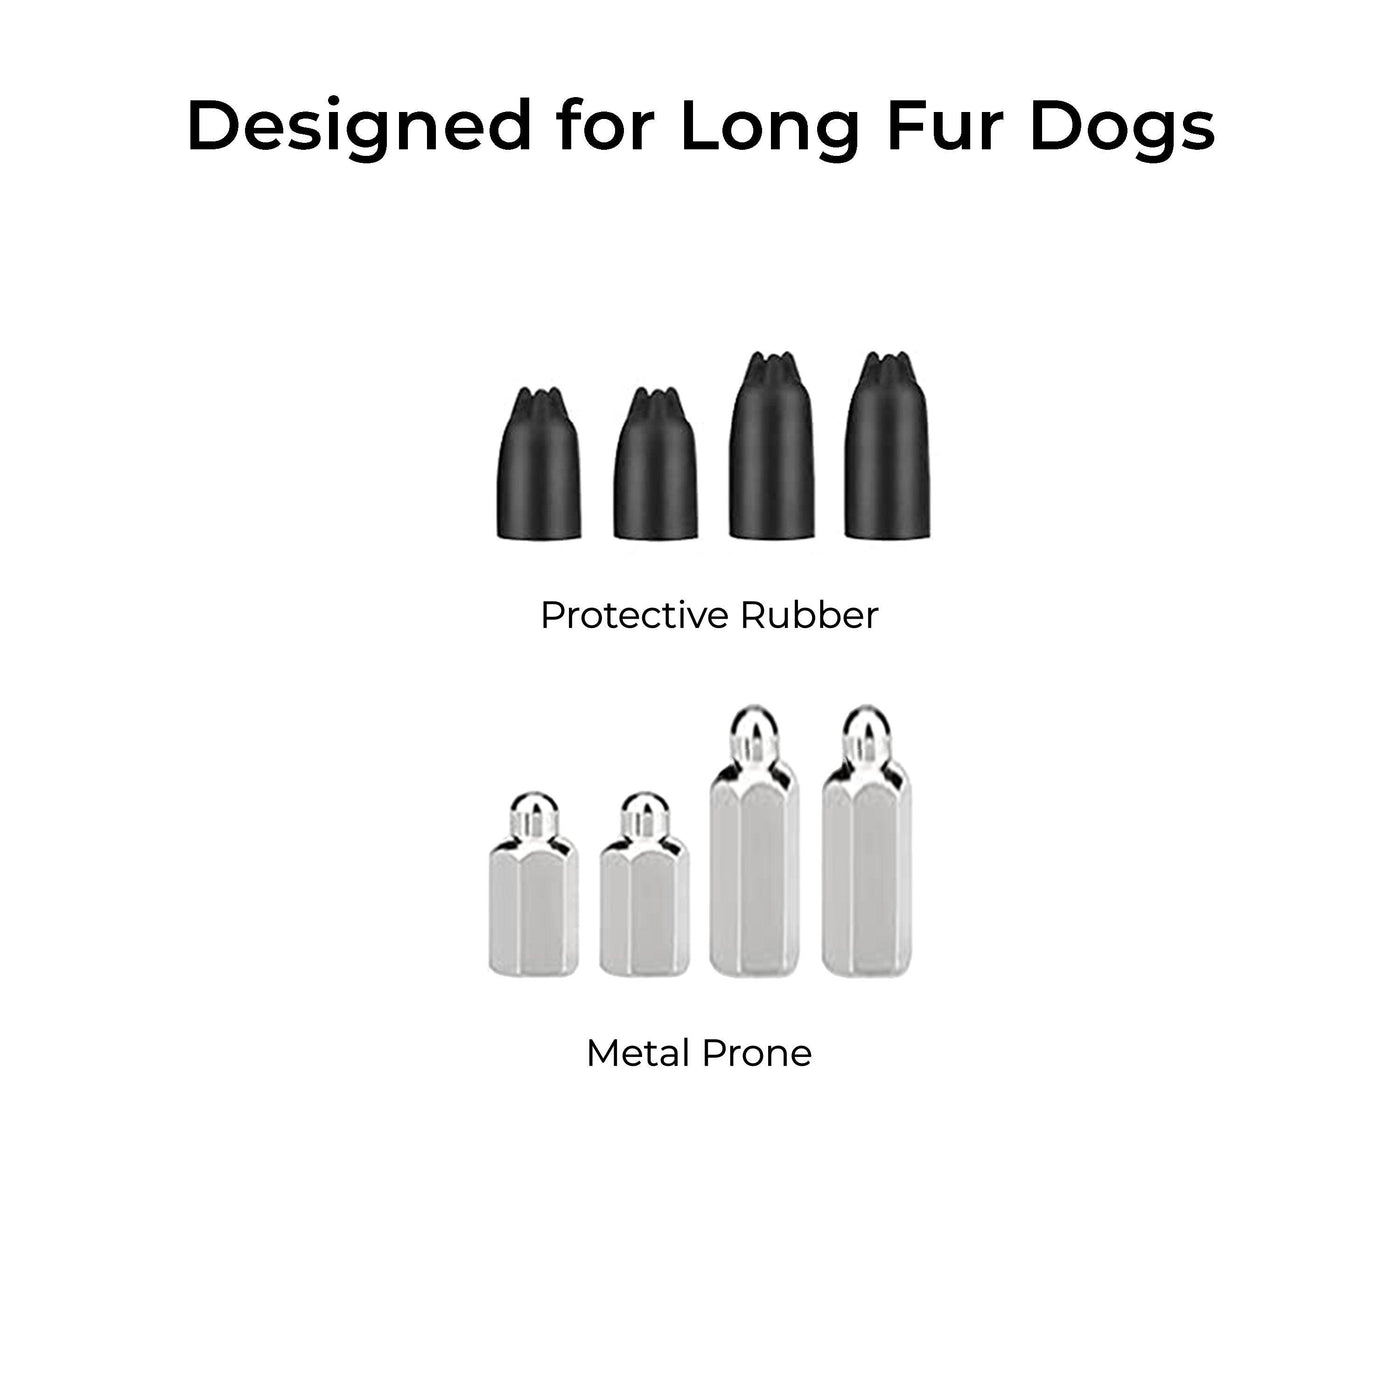 LONG Metal Prongs + Rubber Covers Pack for Long-Fur Dogs